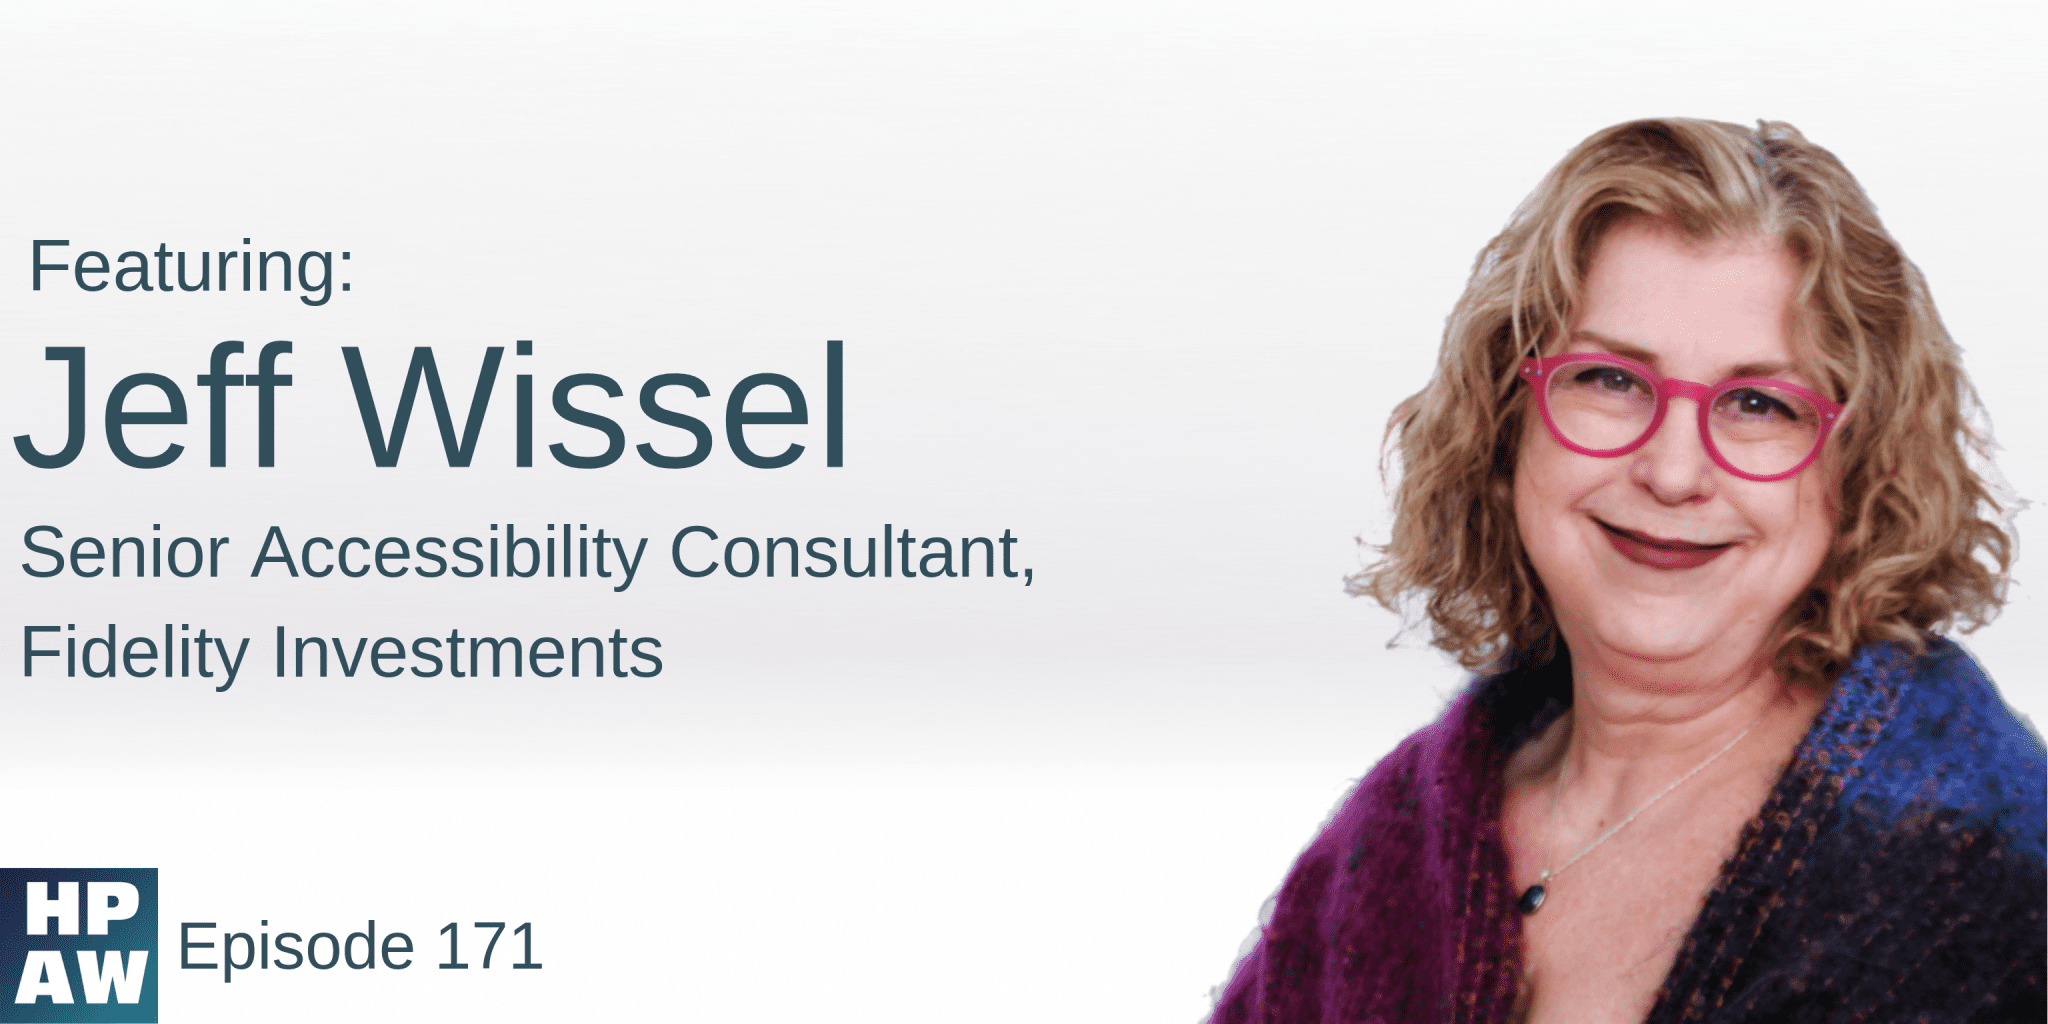 "Featuring Jeff Wissel, Senior Accessibility Consultant - Fidelity Investments